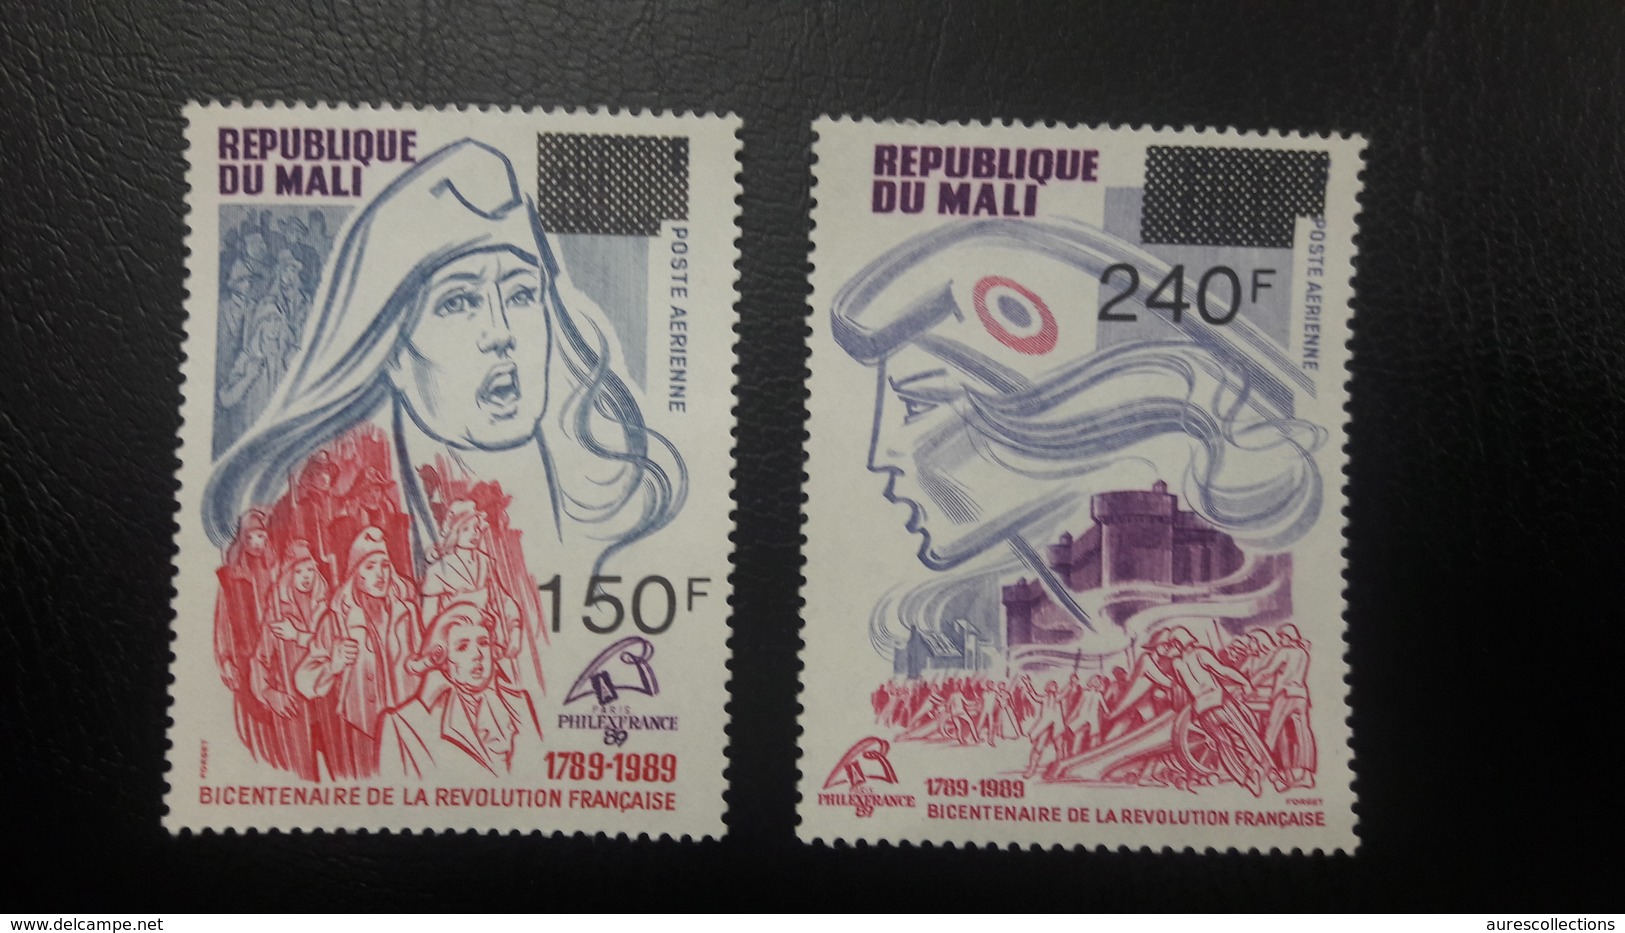 MALI 1992 ON 1989 CENTENAIRE REVOLUTION FRANCAISE FRANCE OVERPRINT OVPT SURCHARGED SURCHARGE URGENCE MNH - Mali (1959-...)